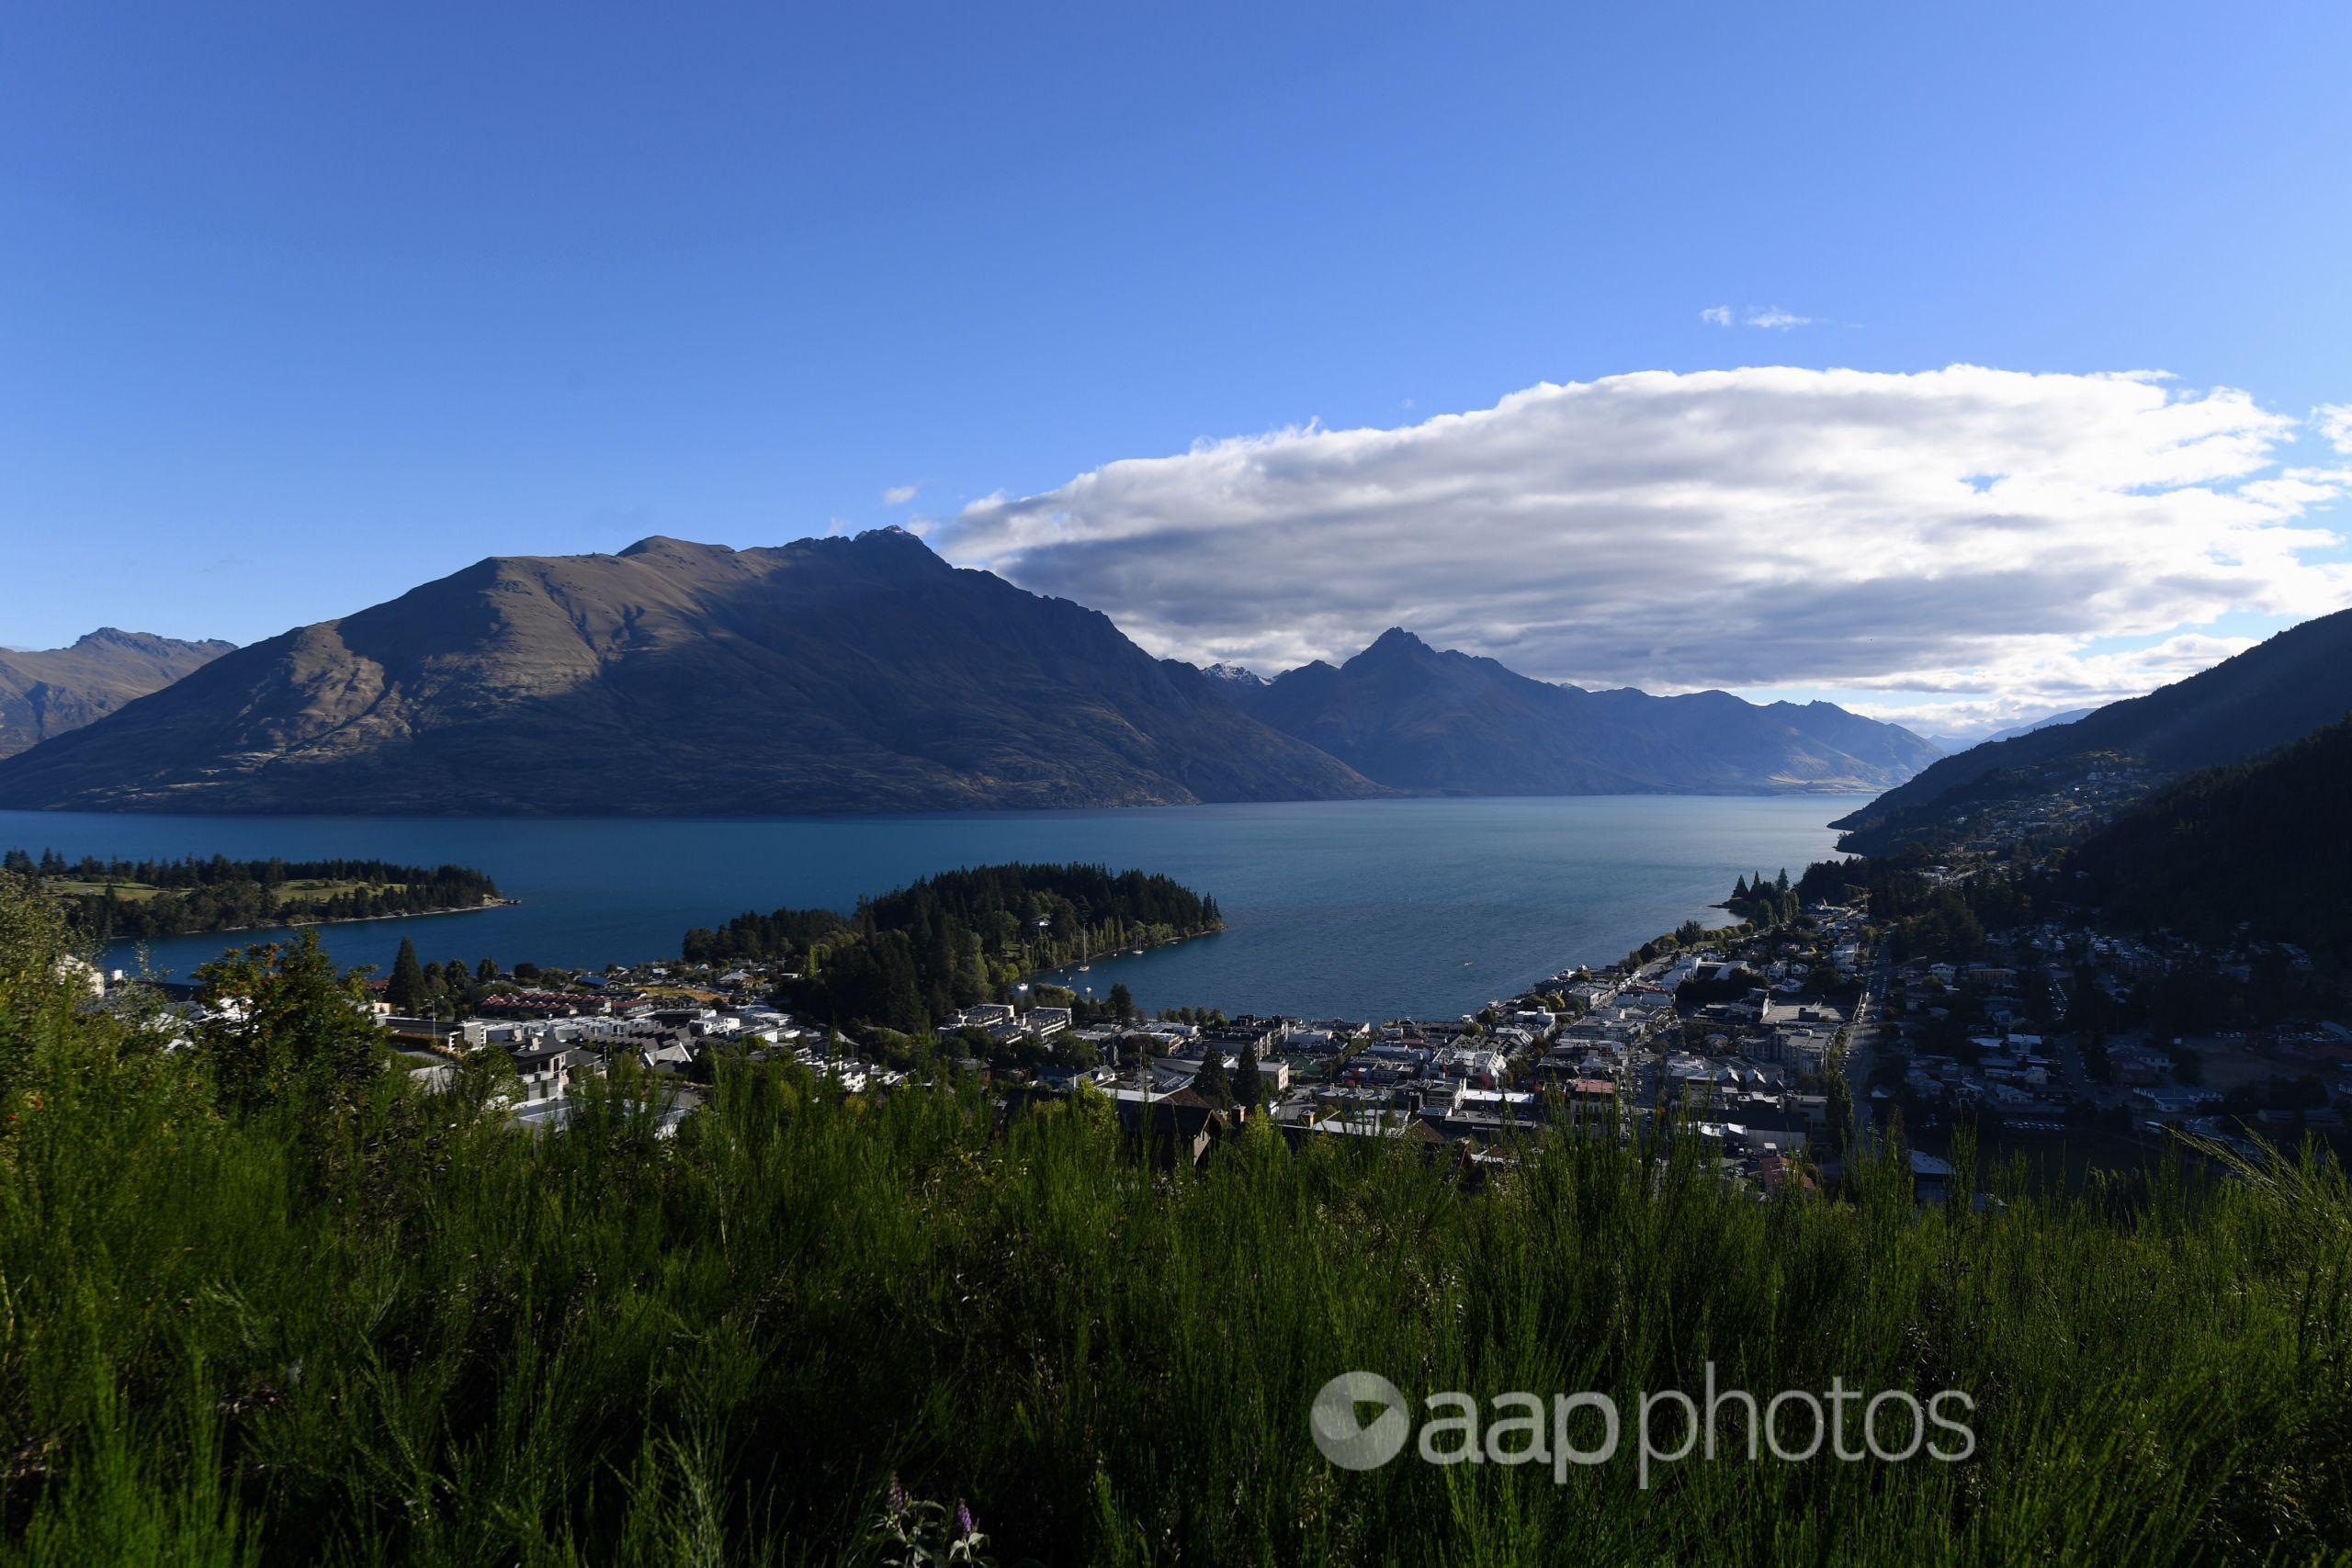 Overview of Lake Wakatipu and the city centre of Queenstown, NZ.